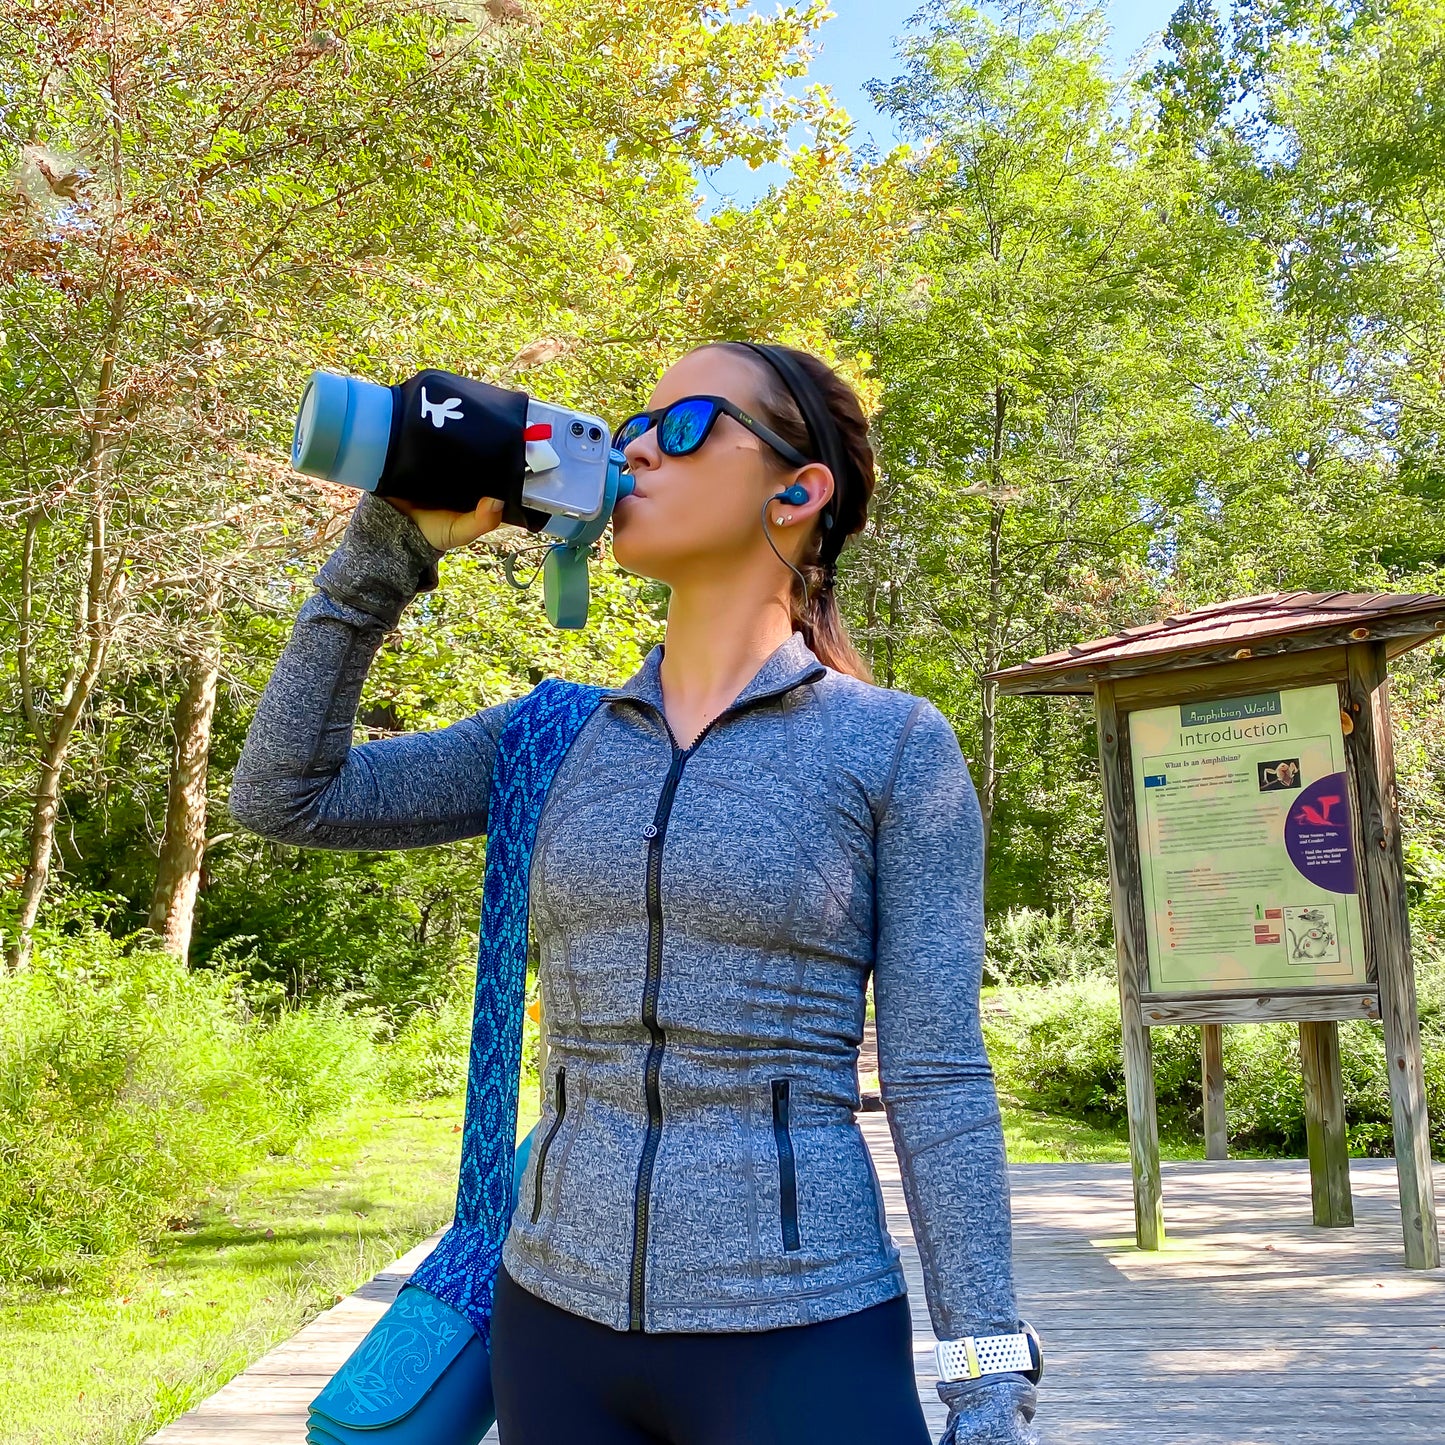 A girl drinking out of a water bottle with a phone pouch while hiking